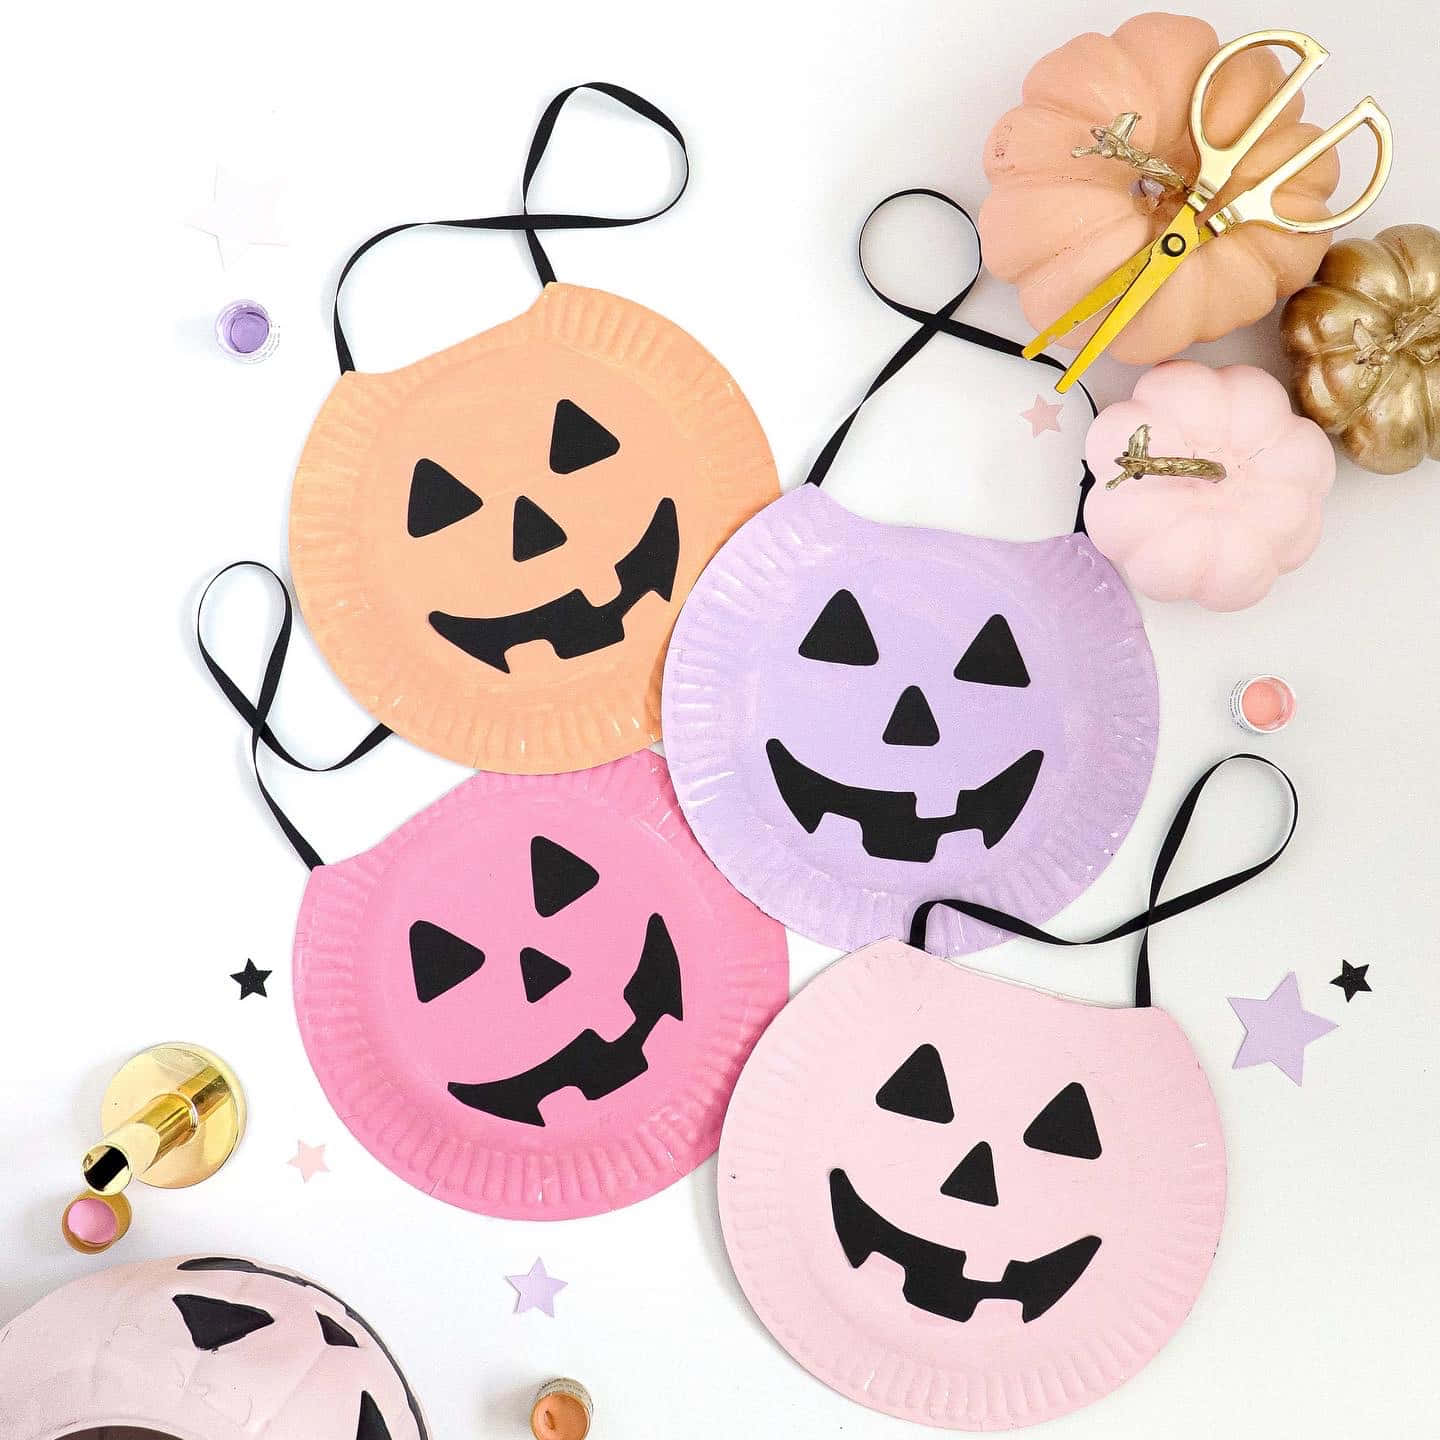 Turn your home into a cozy, spooky and festive place with these easy Halloween crafts Wallpaper